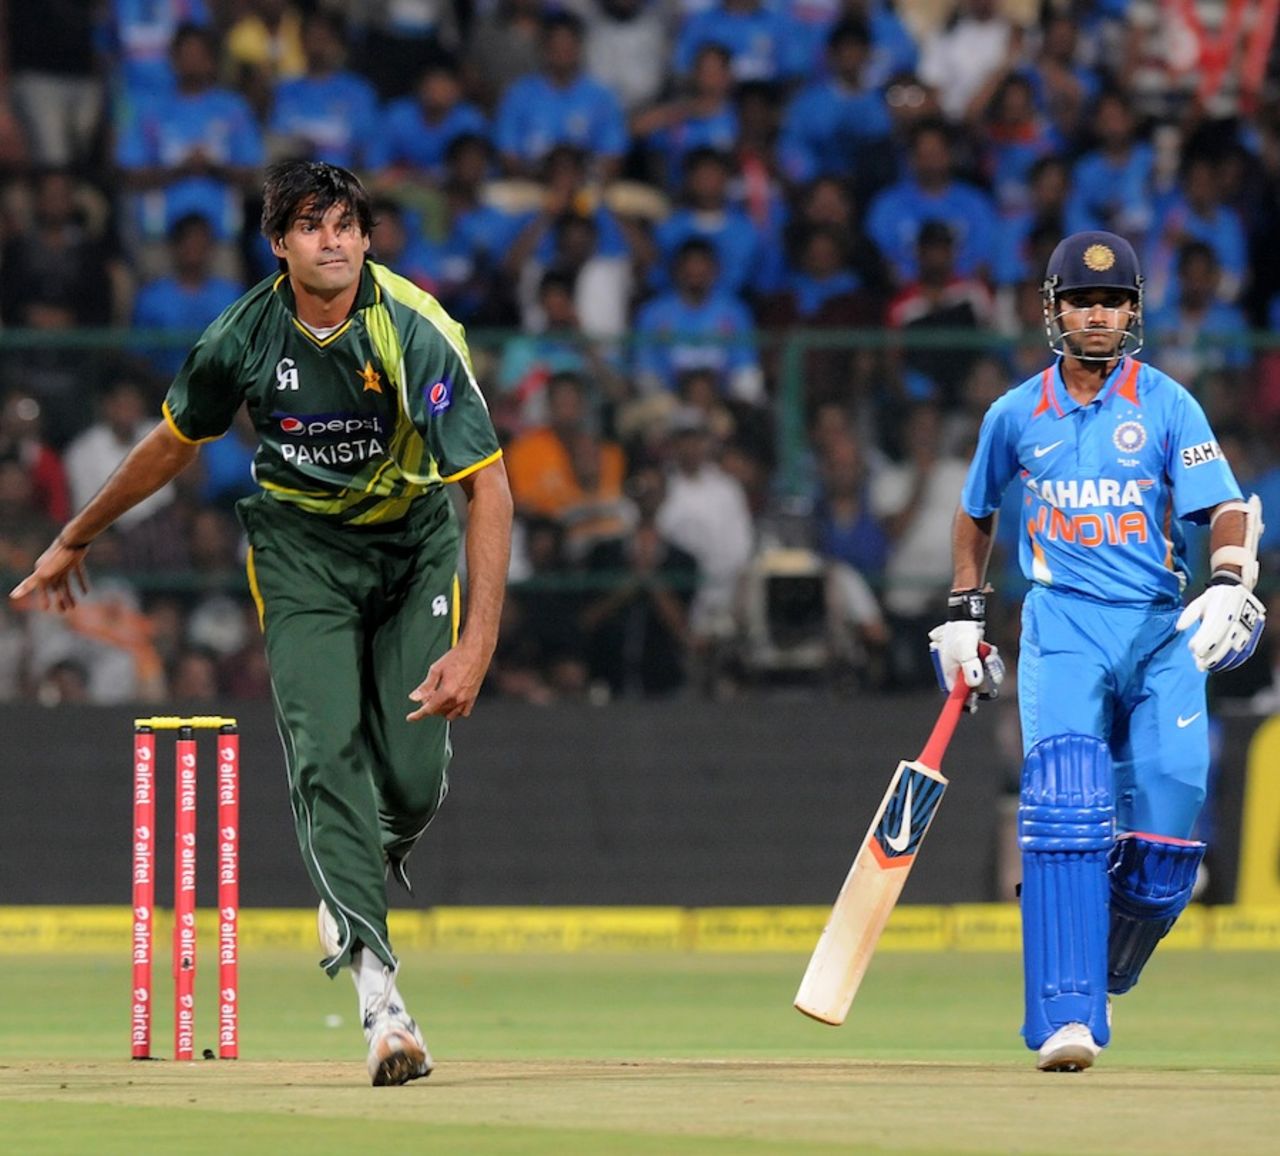 Mohammad Irfan hustled batsmen with pace and bounce, India v Pakistan, 1st T20, Bangalore, December 25, 2012